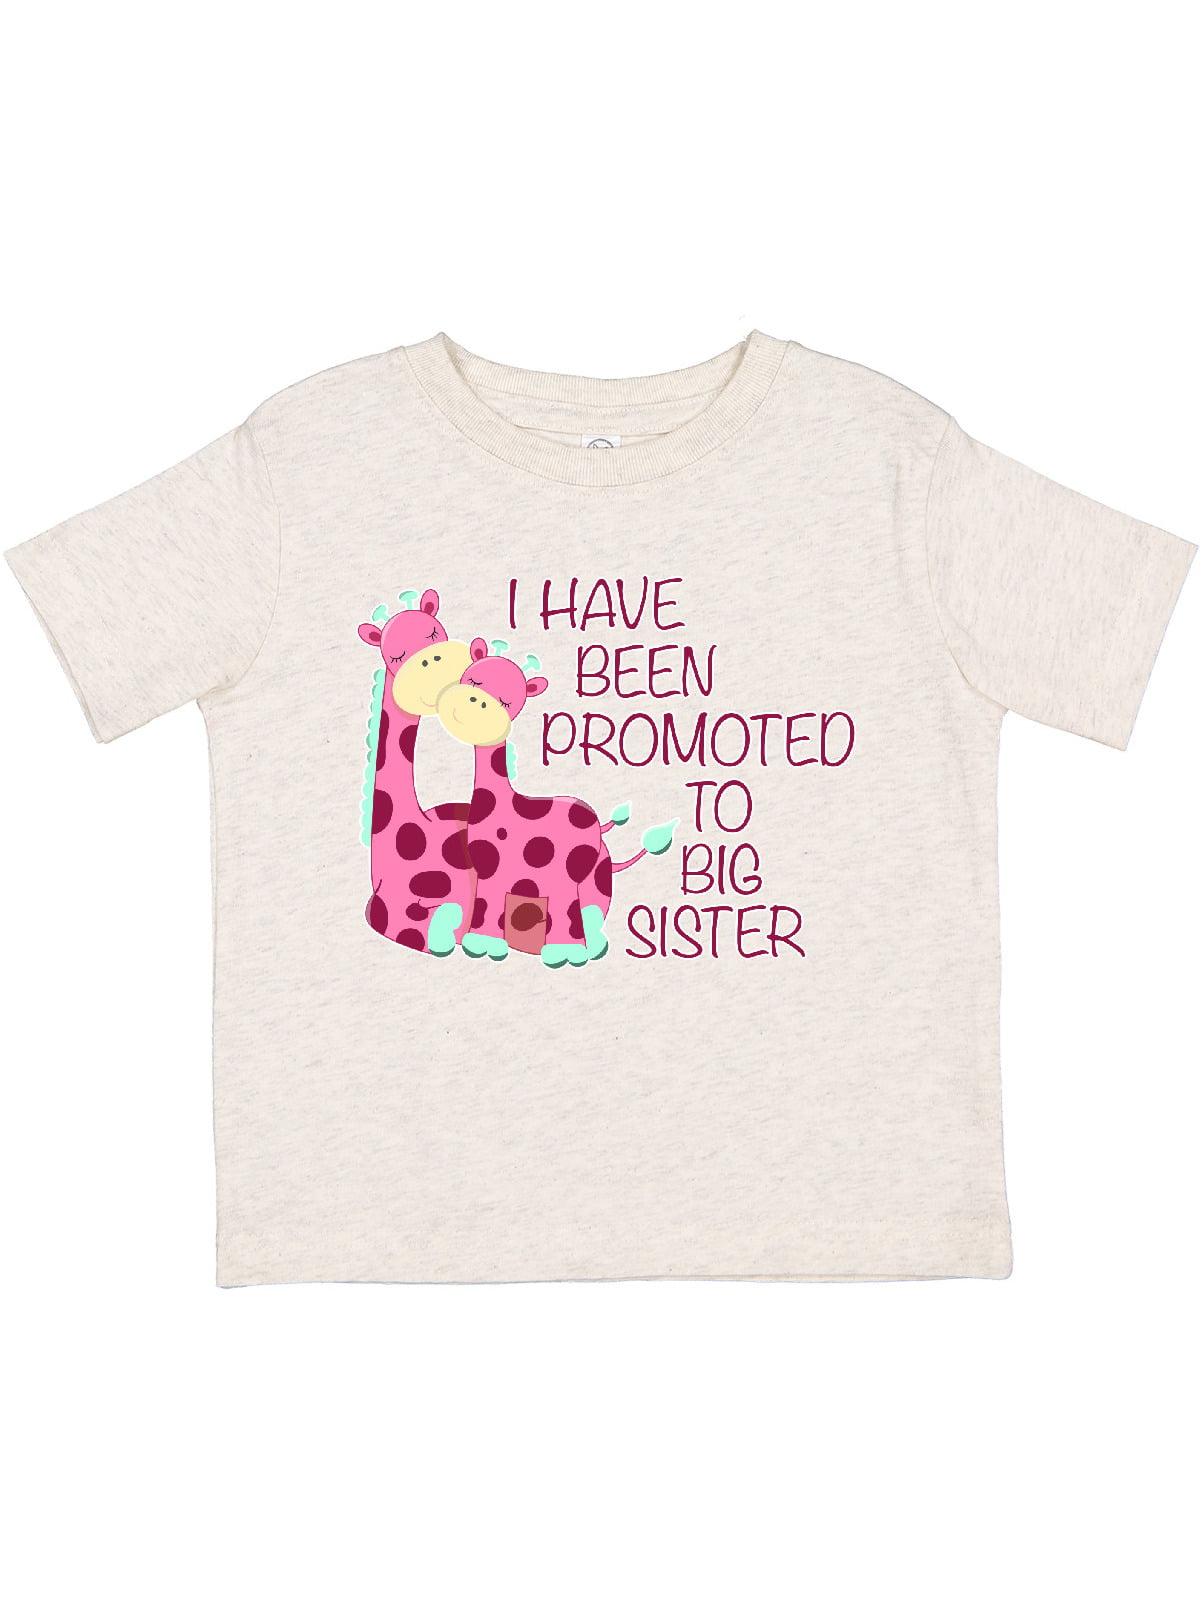 LYSMuch Toddler Baby Girls T-Shirt Promoted to Big Sister Letters Print Short Sleeve Blouse 